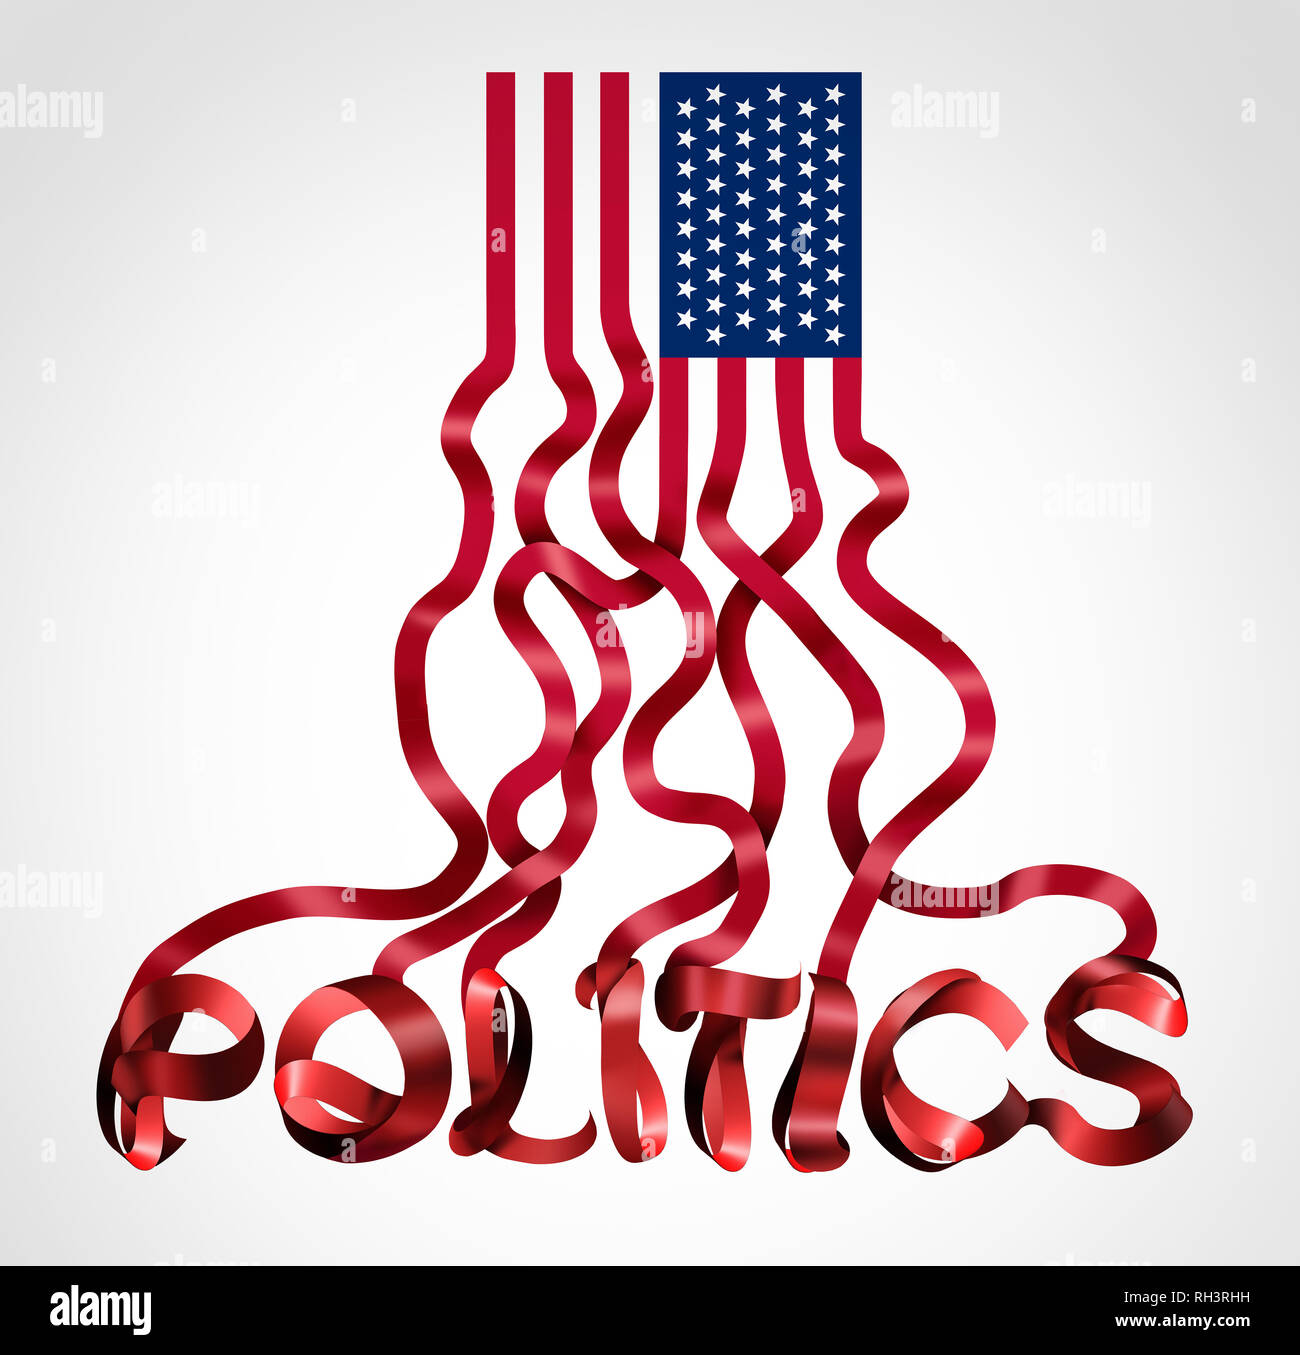 US politics and United States government political symbol as an American flag shaped as text as a creative icon for conservative republican. Stock Photo